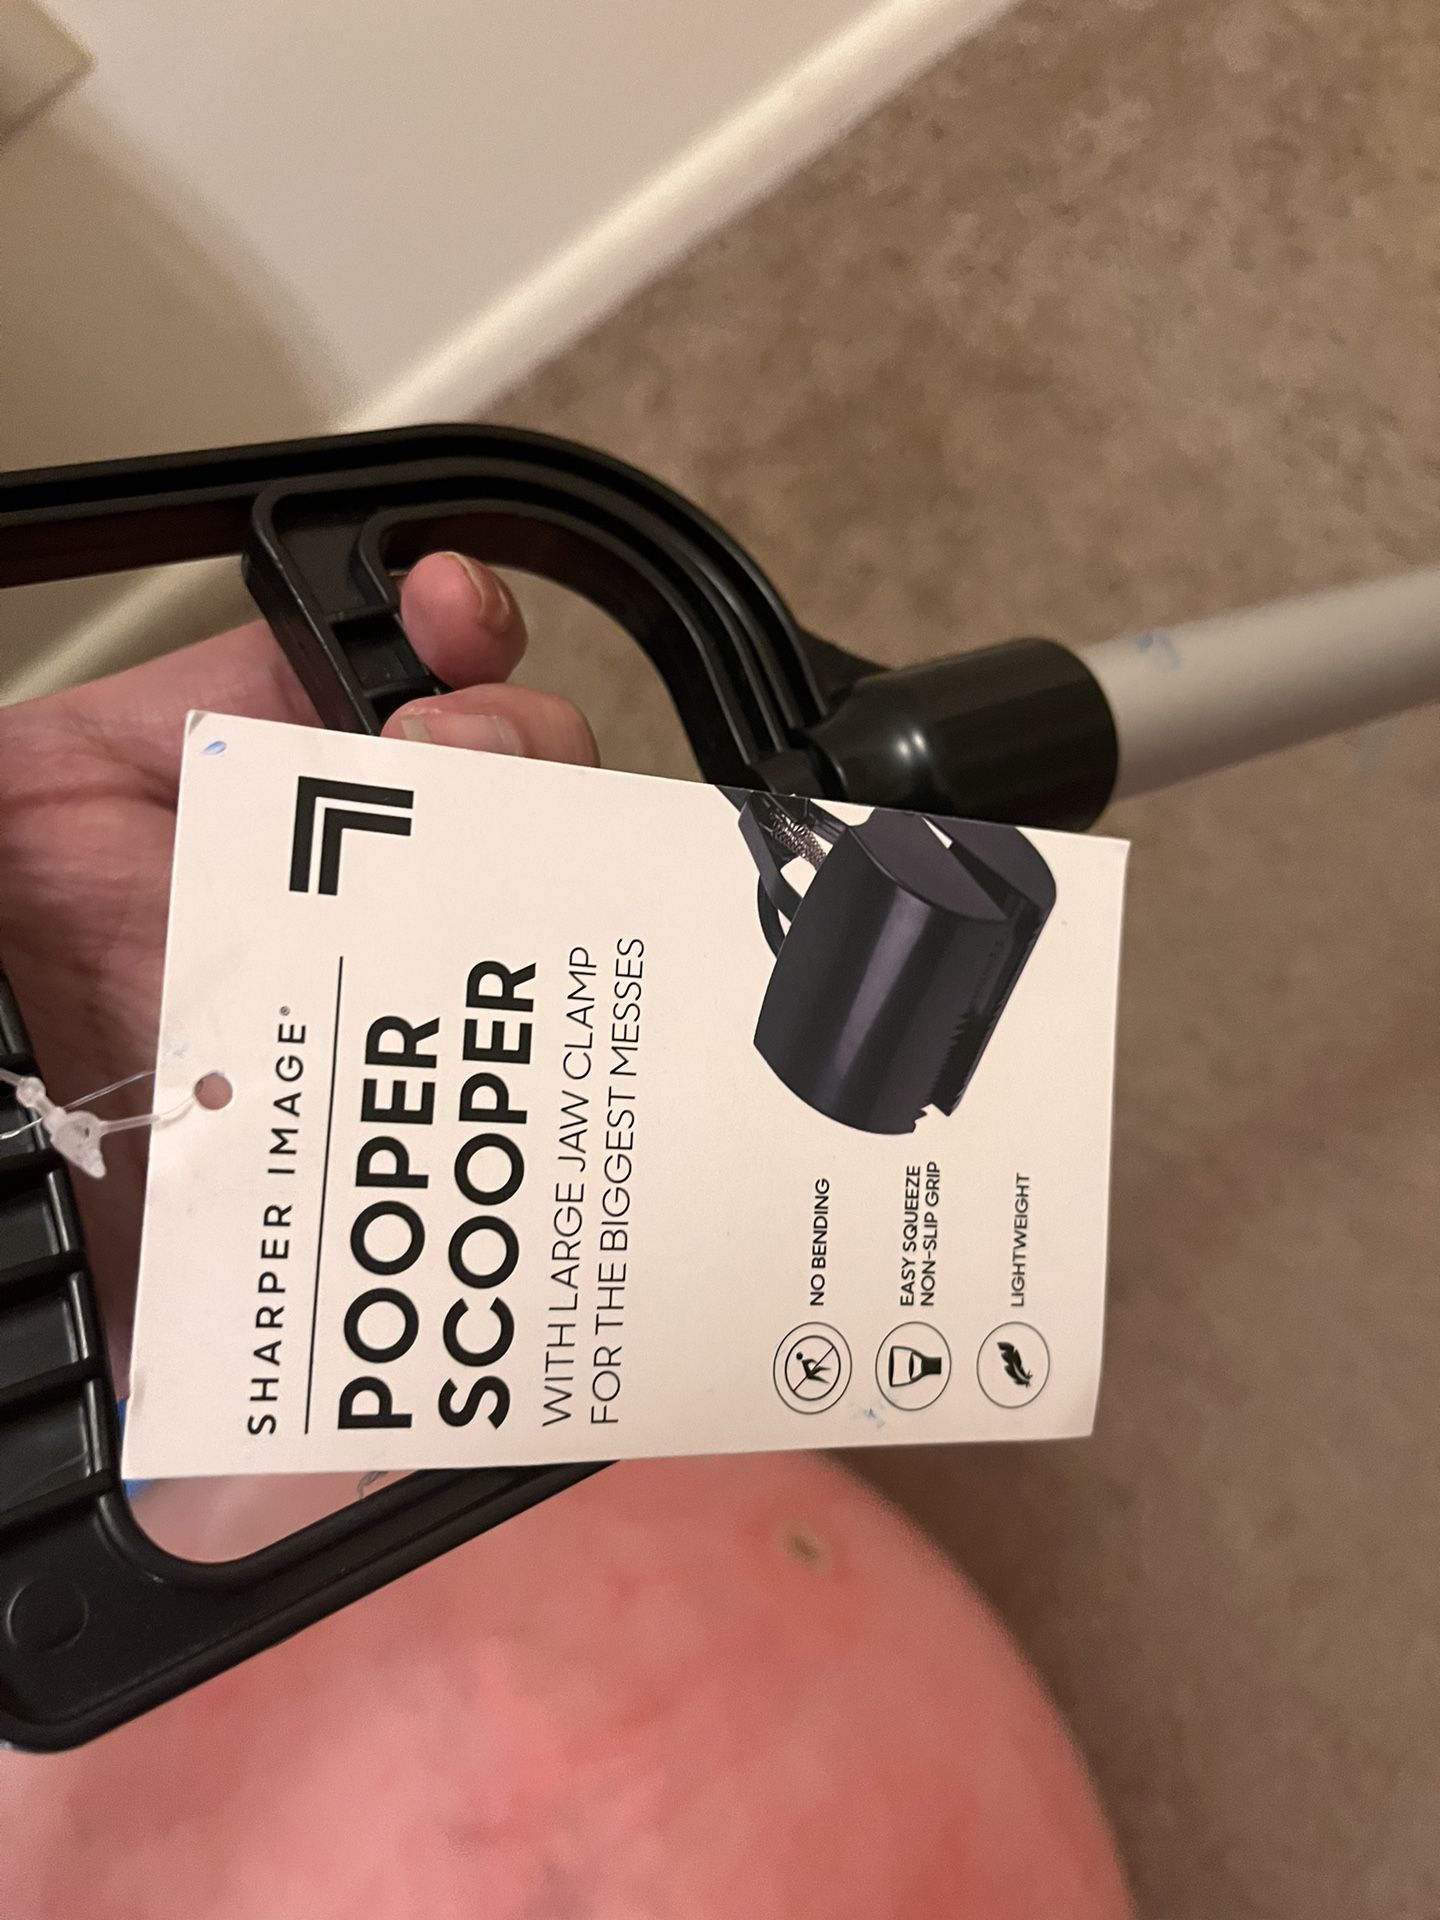 Poop Scooper For Dogs